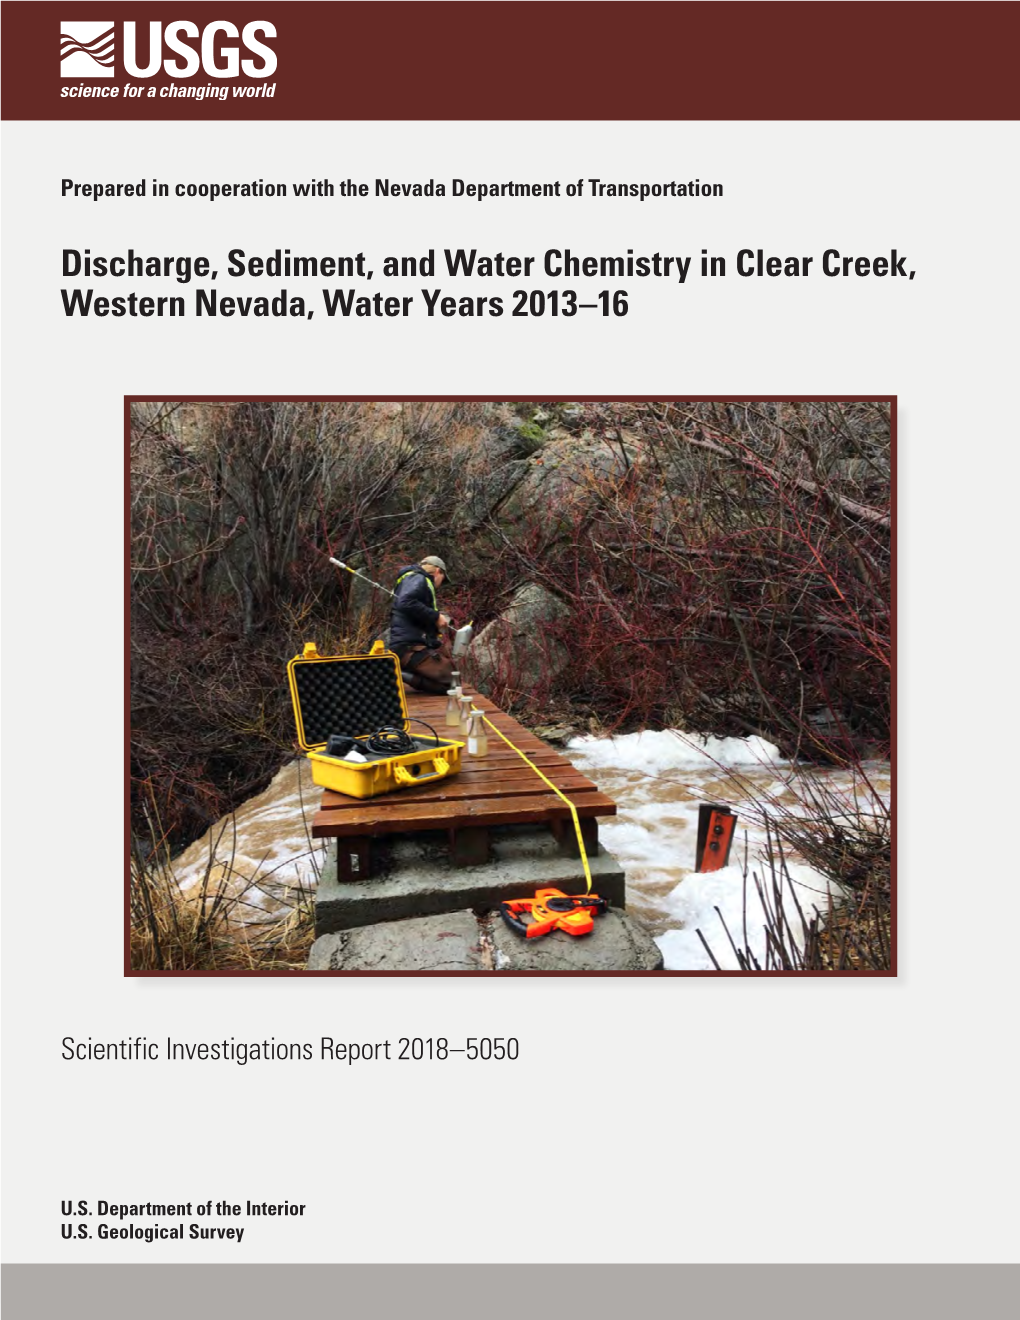 Discharge, Sediment, and Water Chemistry in Clear Creek, Western Nevada, Water Years 2013–16